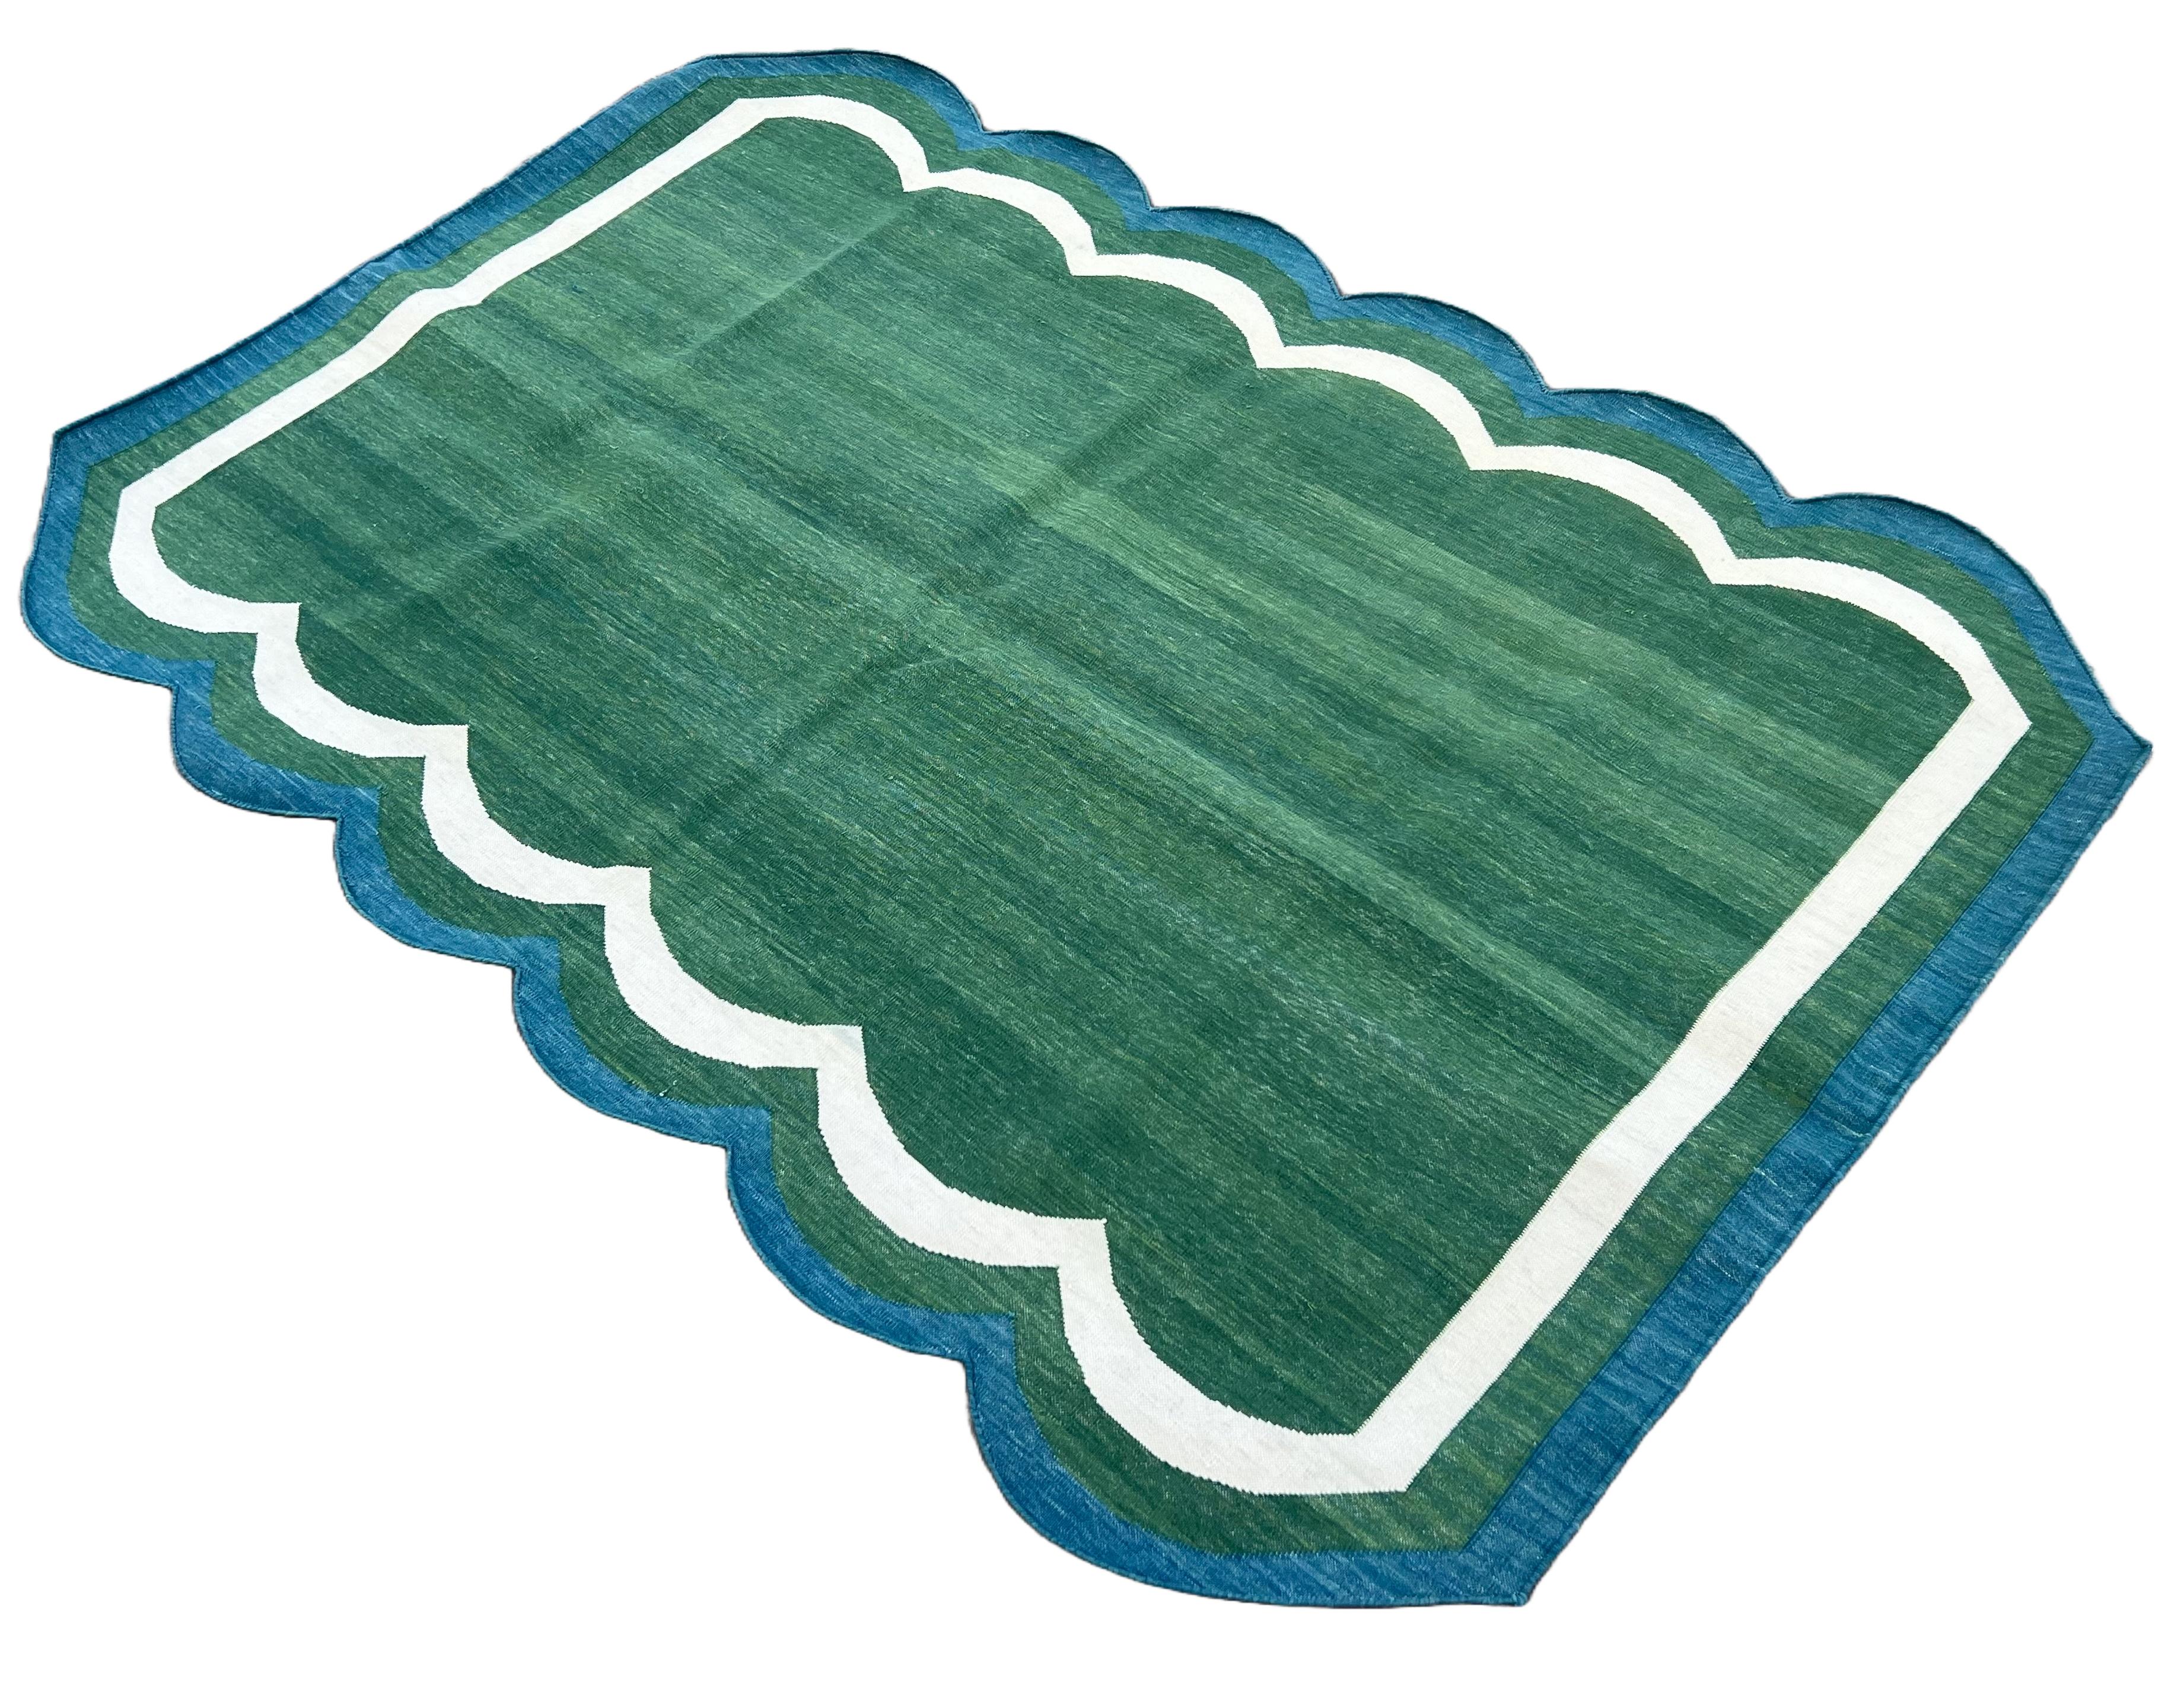 Cotton Vegetable Dyed Forest Green & Teal Blue Two Sided Scalloped Rug-4'x6' (Scallops runs on all 6' Sides)
These special flat-weave dhurries are hand-woven with 15 ply 100% cotton yarn. Due to the special manufacturing techniques used to create